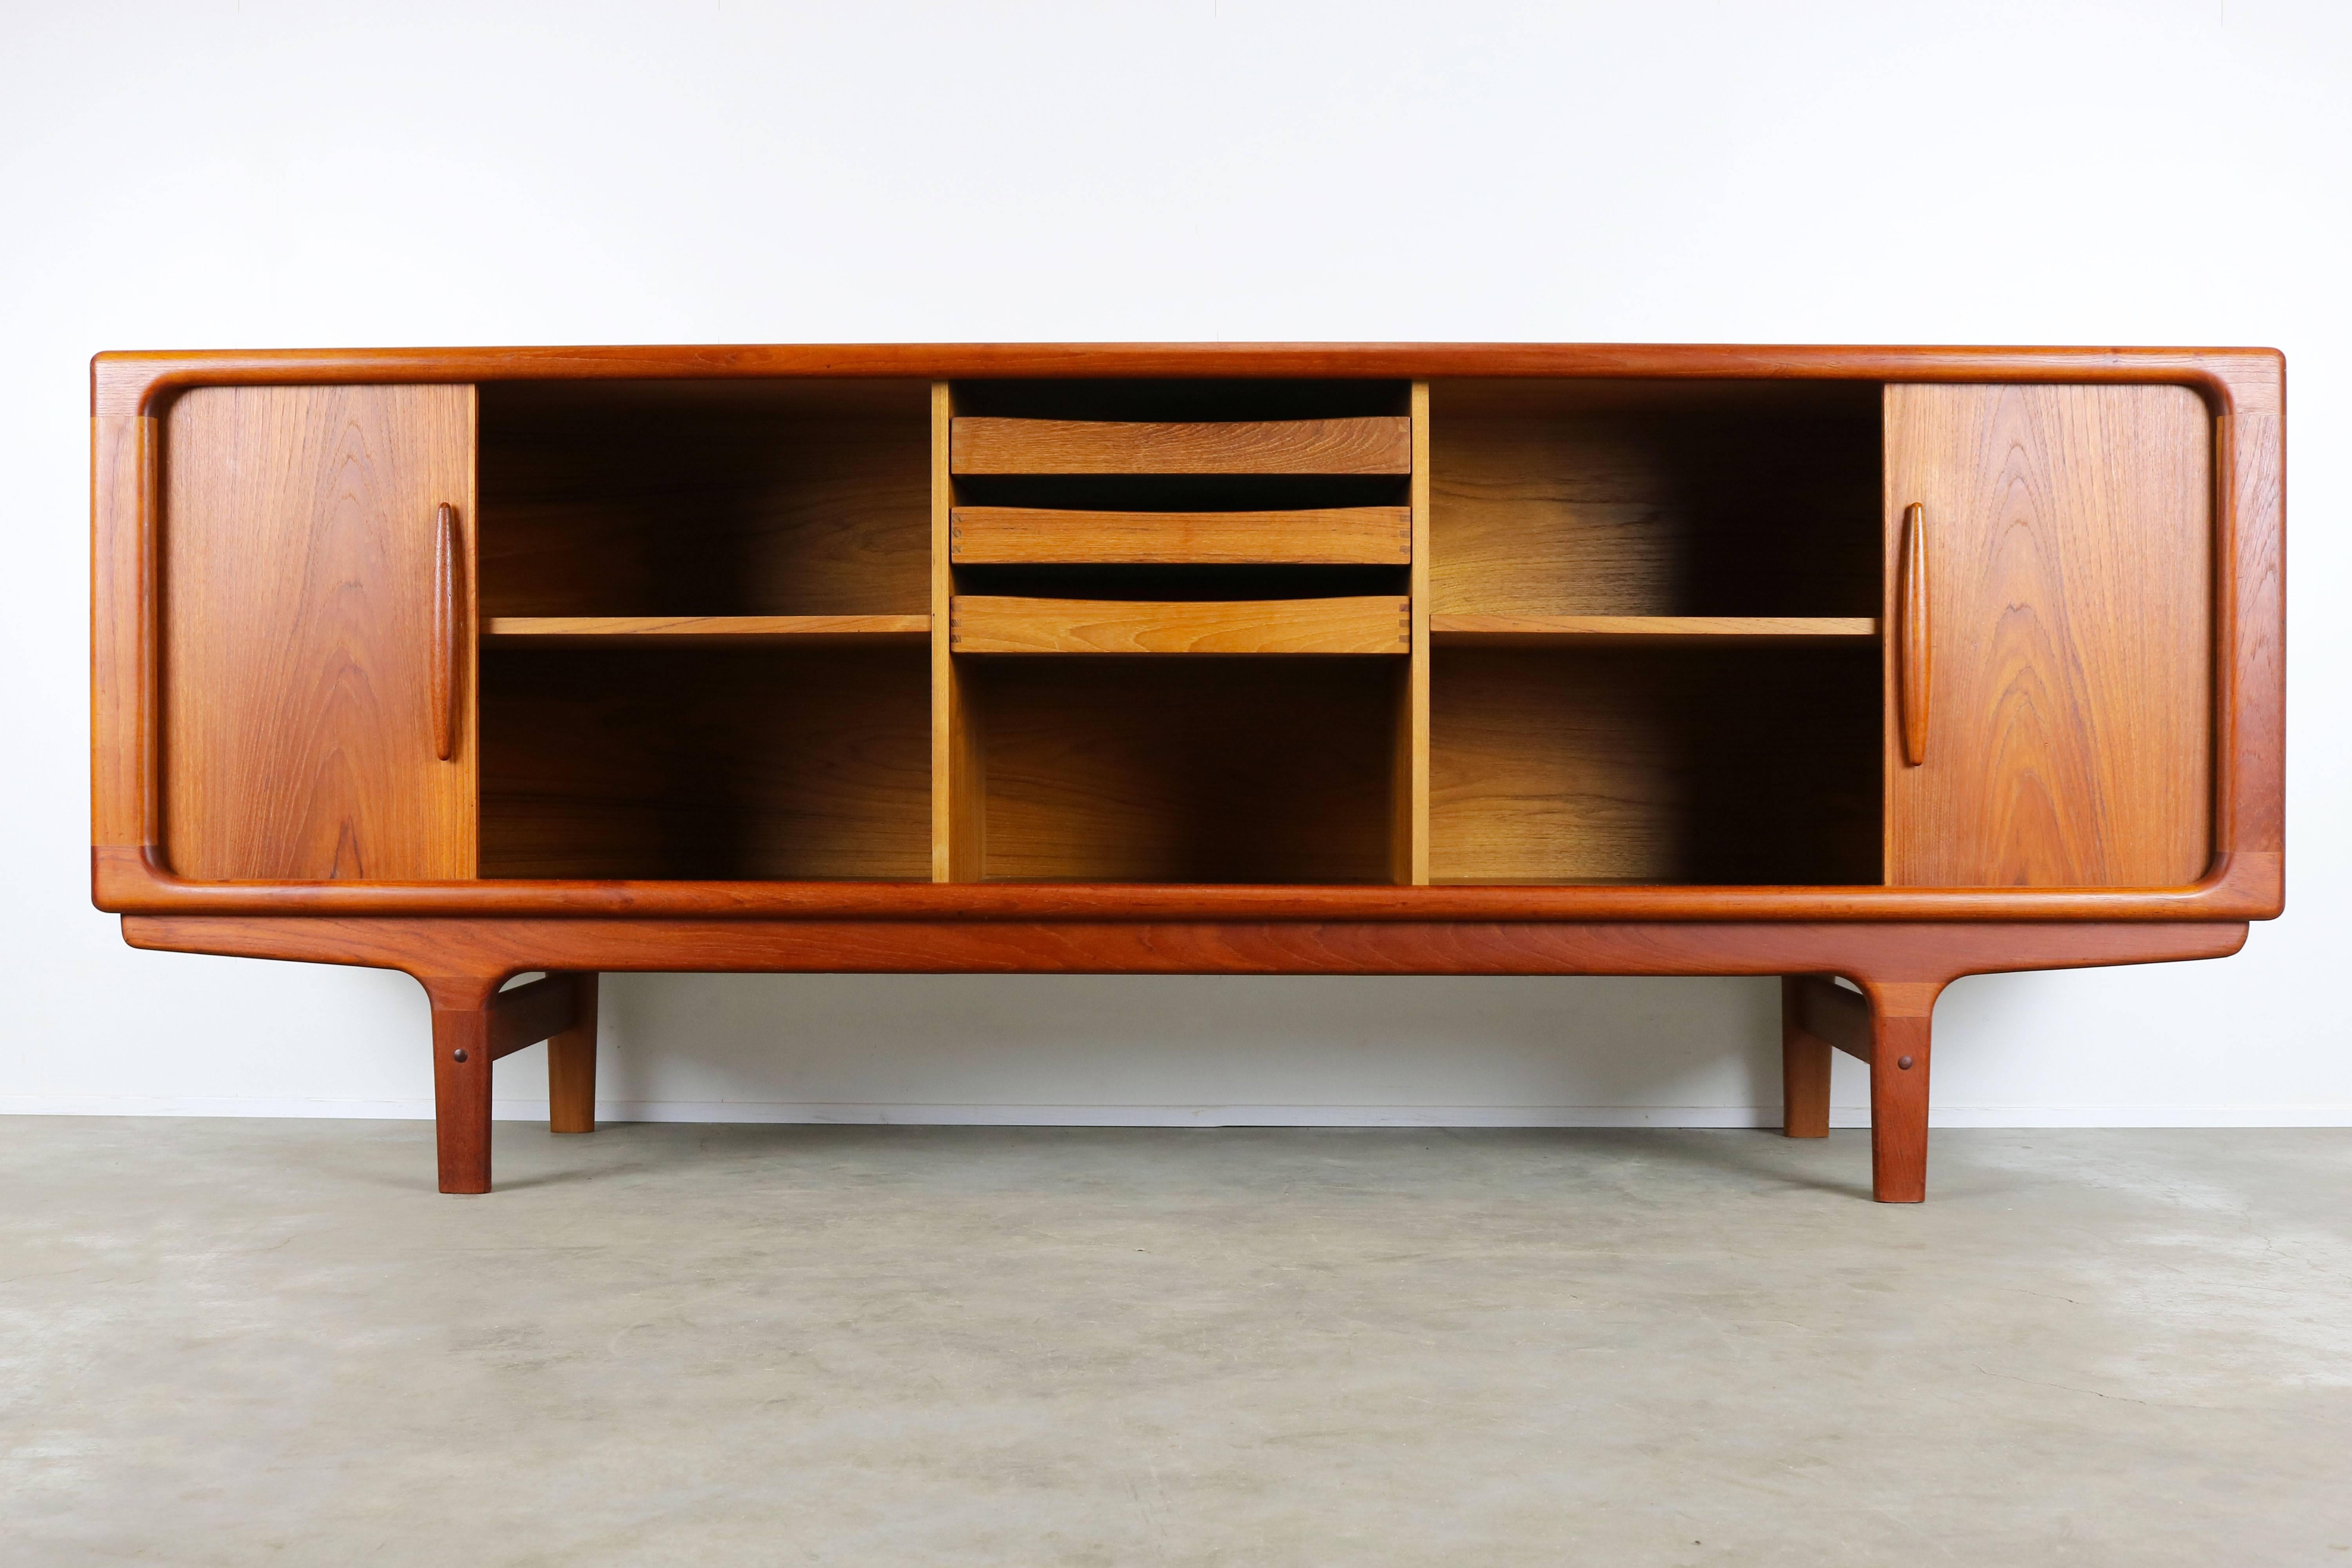 Mid-20th Century Magnificent Danish Sculpted Teak Sideboard / Credenza by Dyrlund Tambour Doors